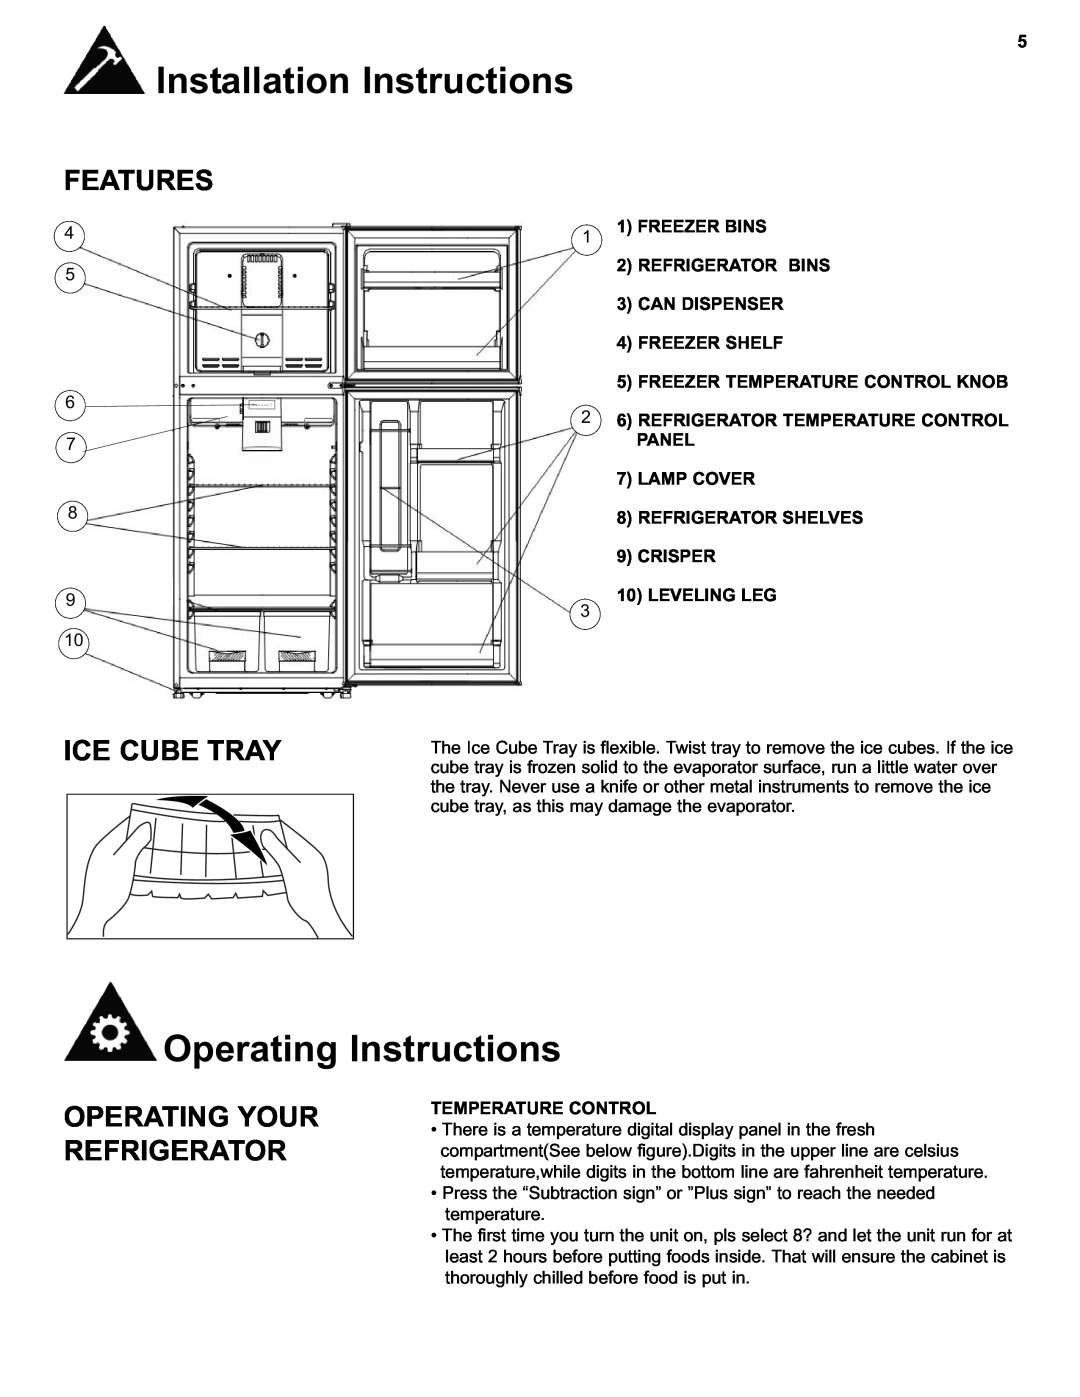 Danby DFF280WDB manual Operating Instructions, Features, Ice Cube Tray, Operating Your Refrigerator, Temperature Control 